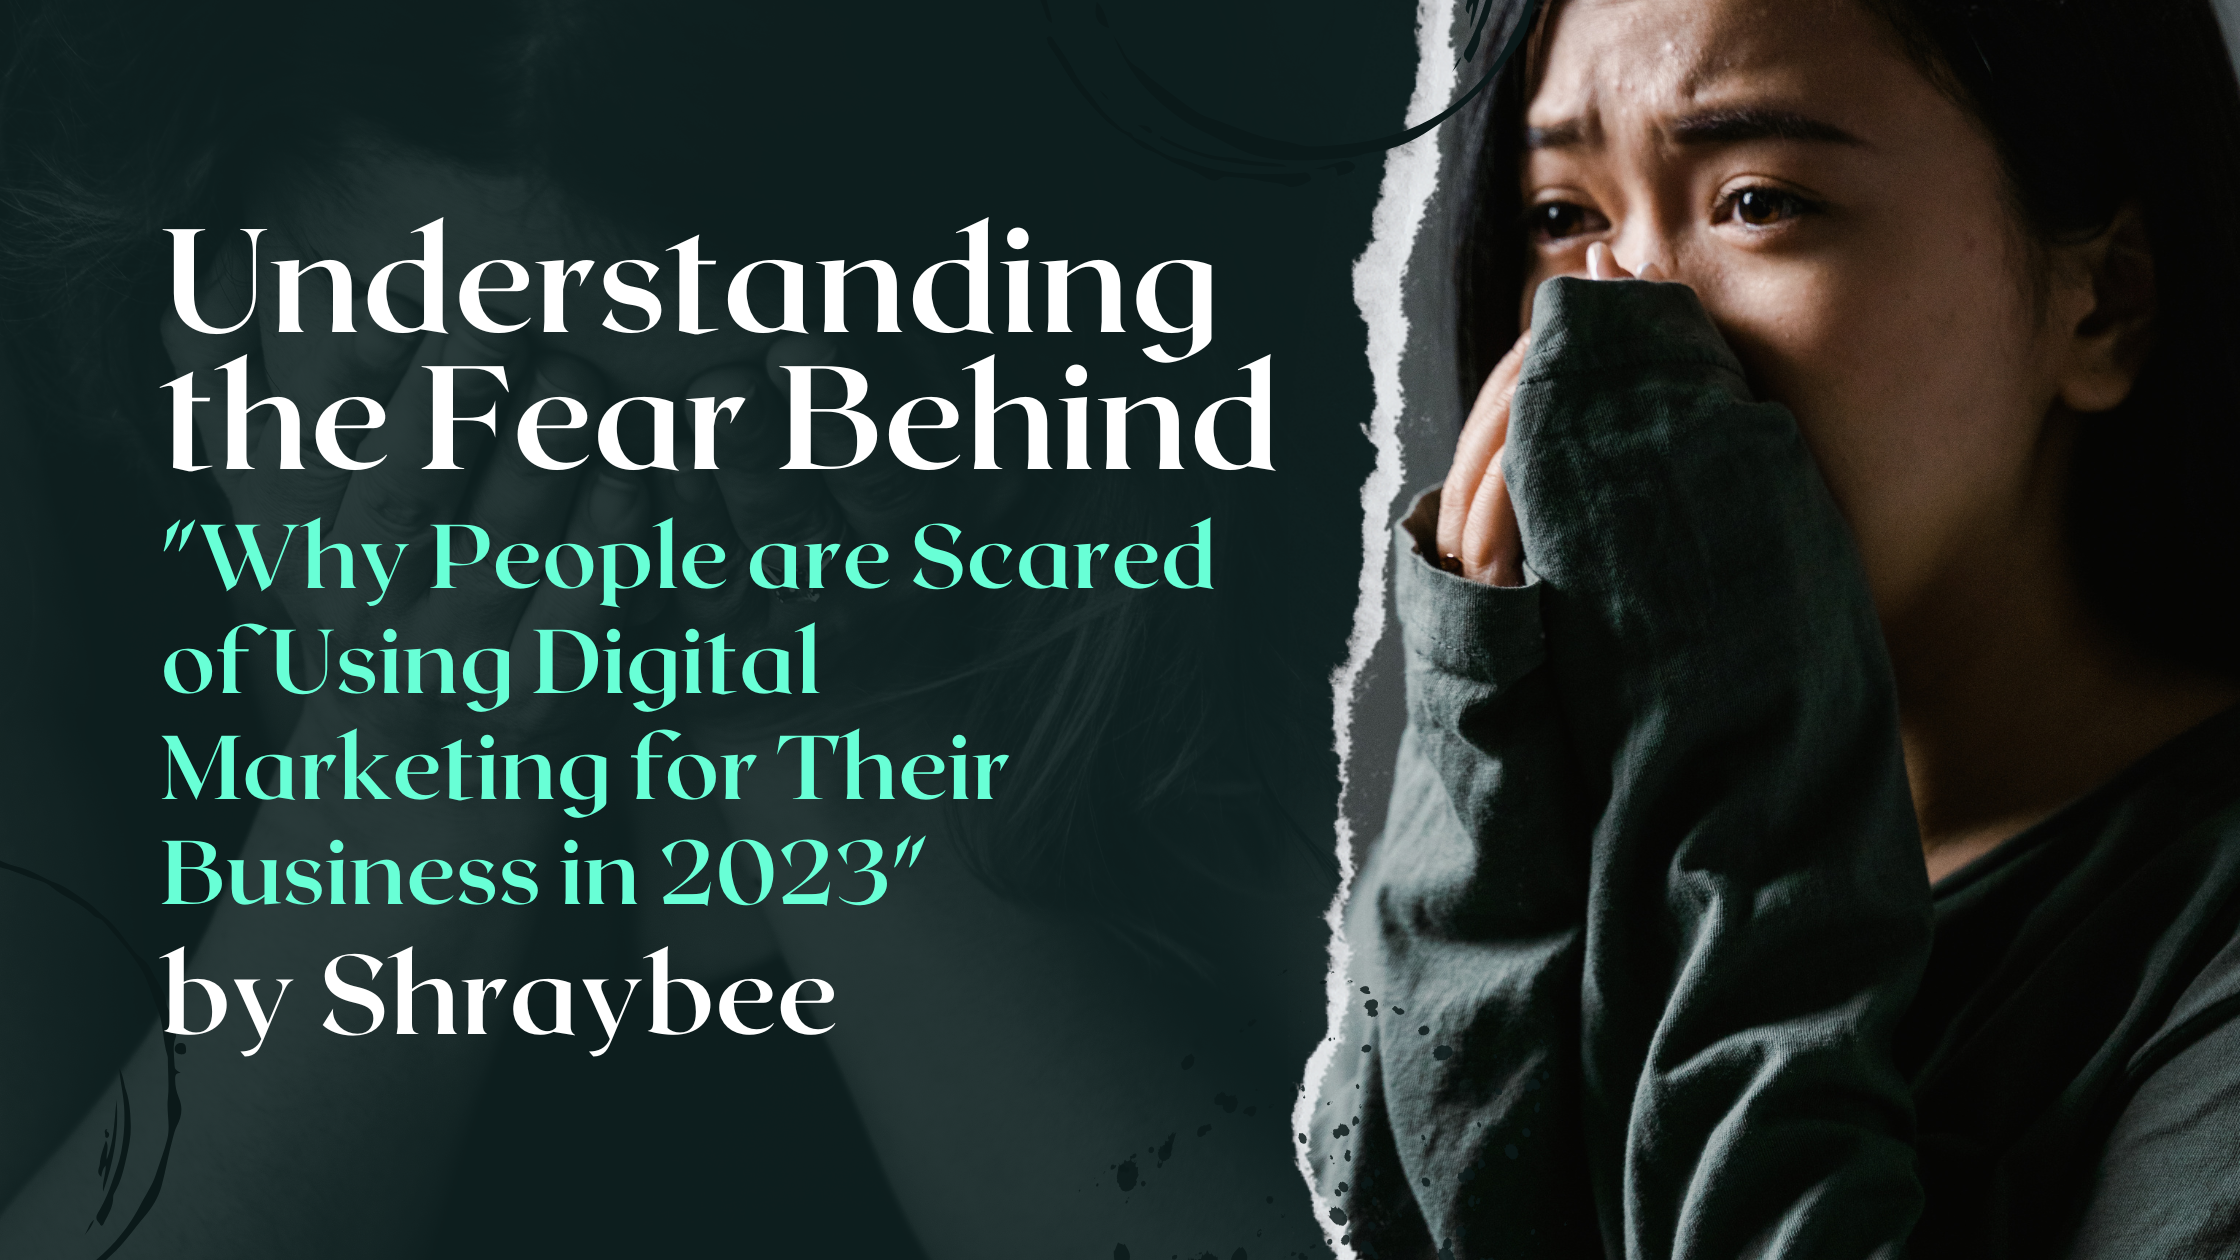 Understanding the Fear Behind "Why People are Scared of Using Digital Marketing for Their Business in 2023"